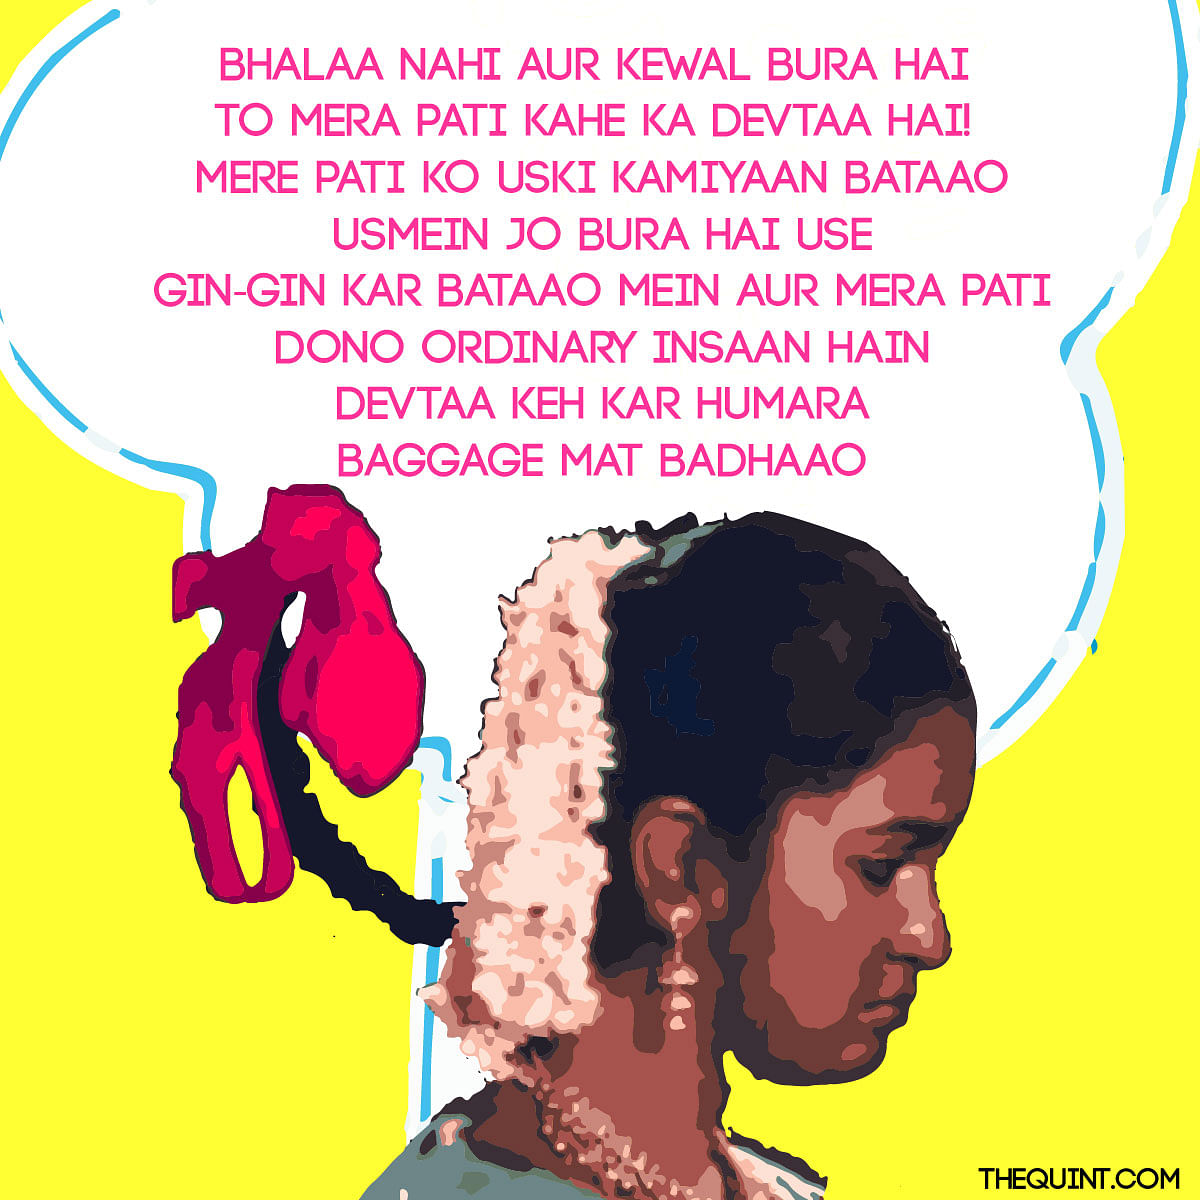 Ever wished you could change the lyrics of your favourite, but oh-so-sexist Bollywood songs? Here’s your chance.